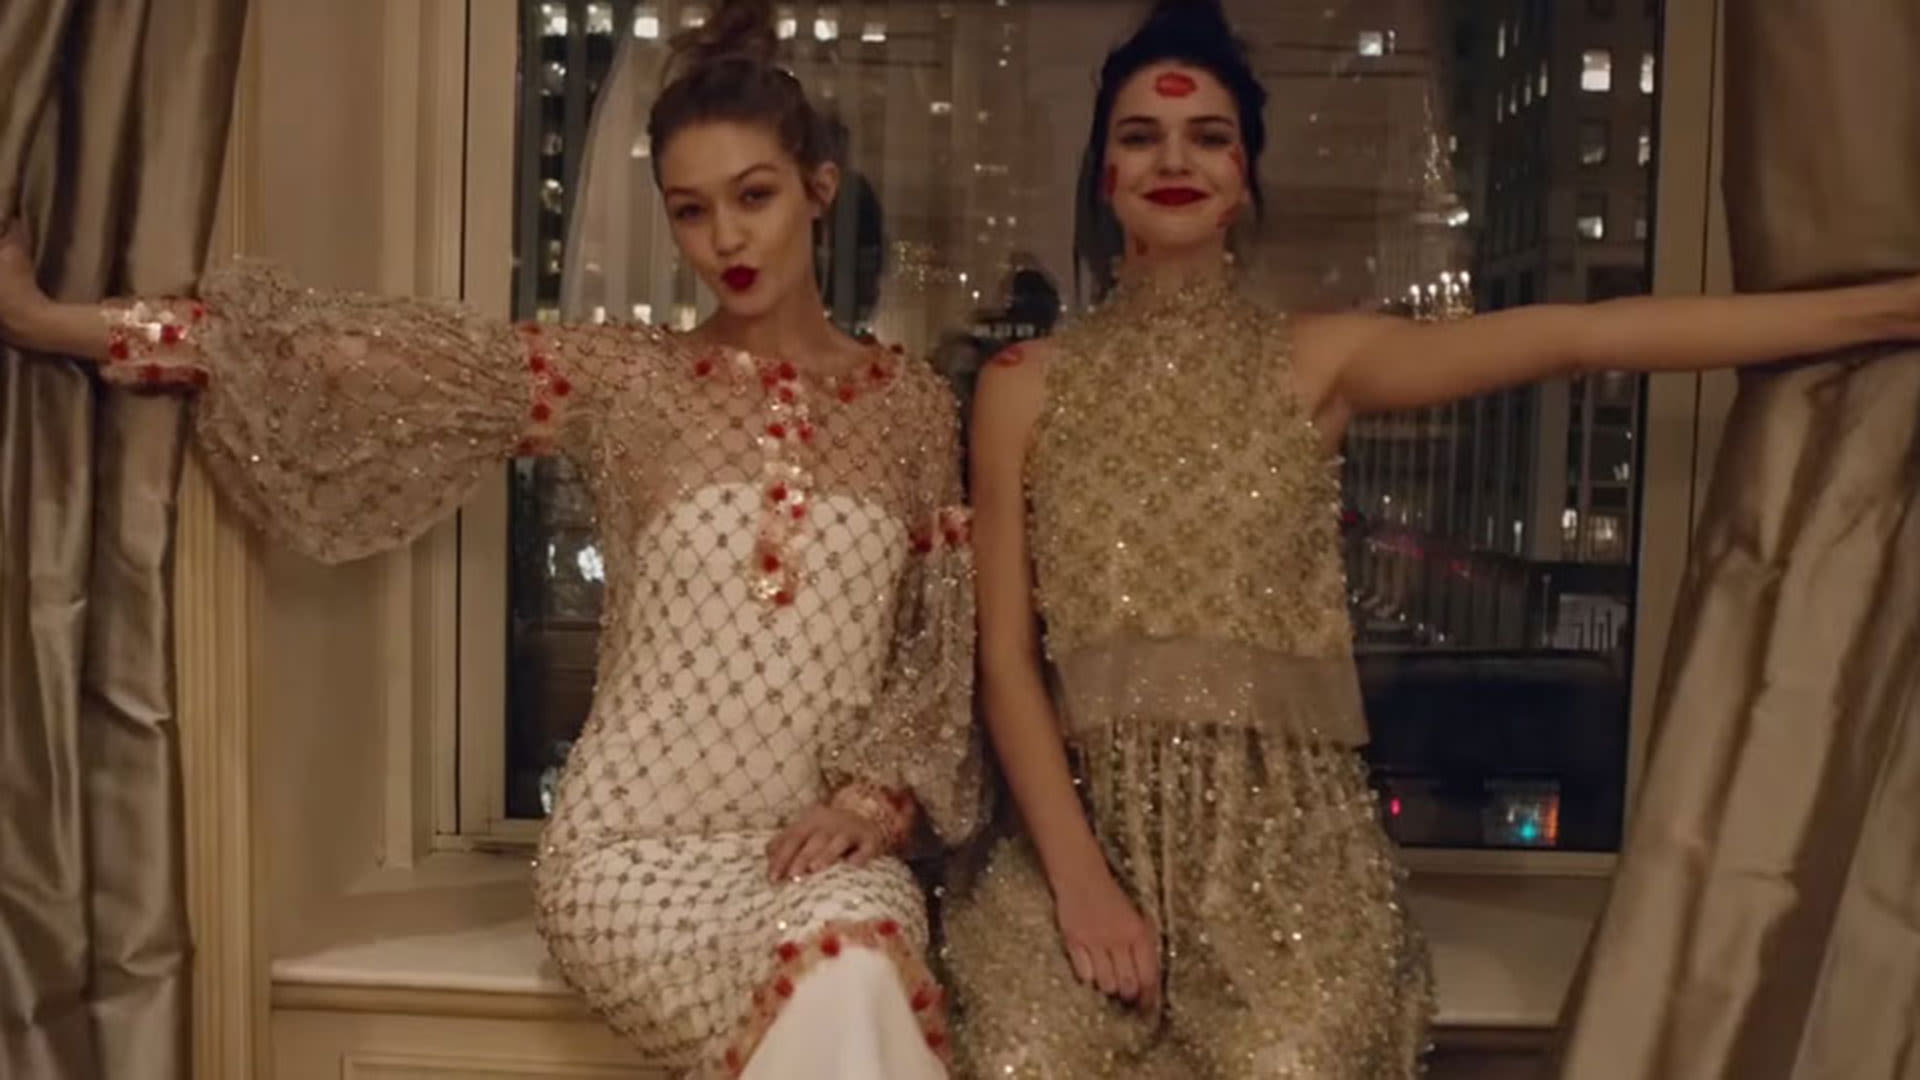 Watch Kendall Jenner and Gigi Hadid's Sleepover Party in Chanel Couture, On Set with Vogue